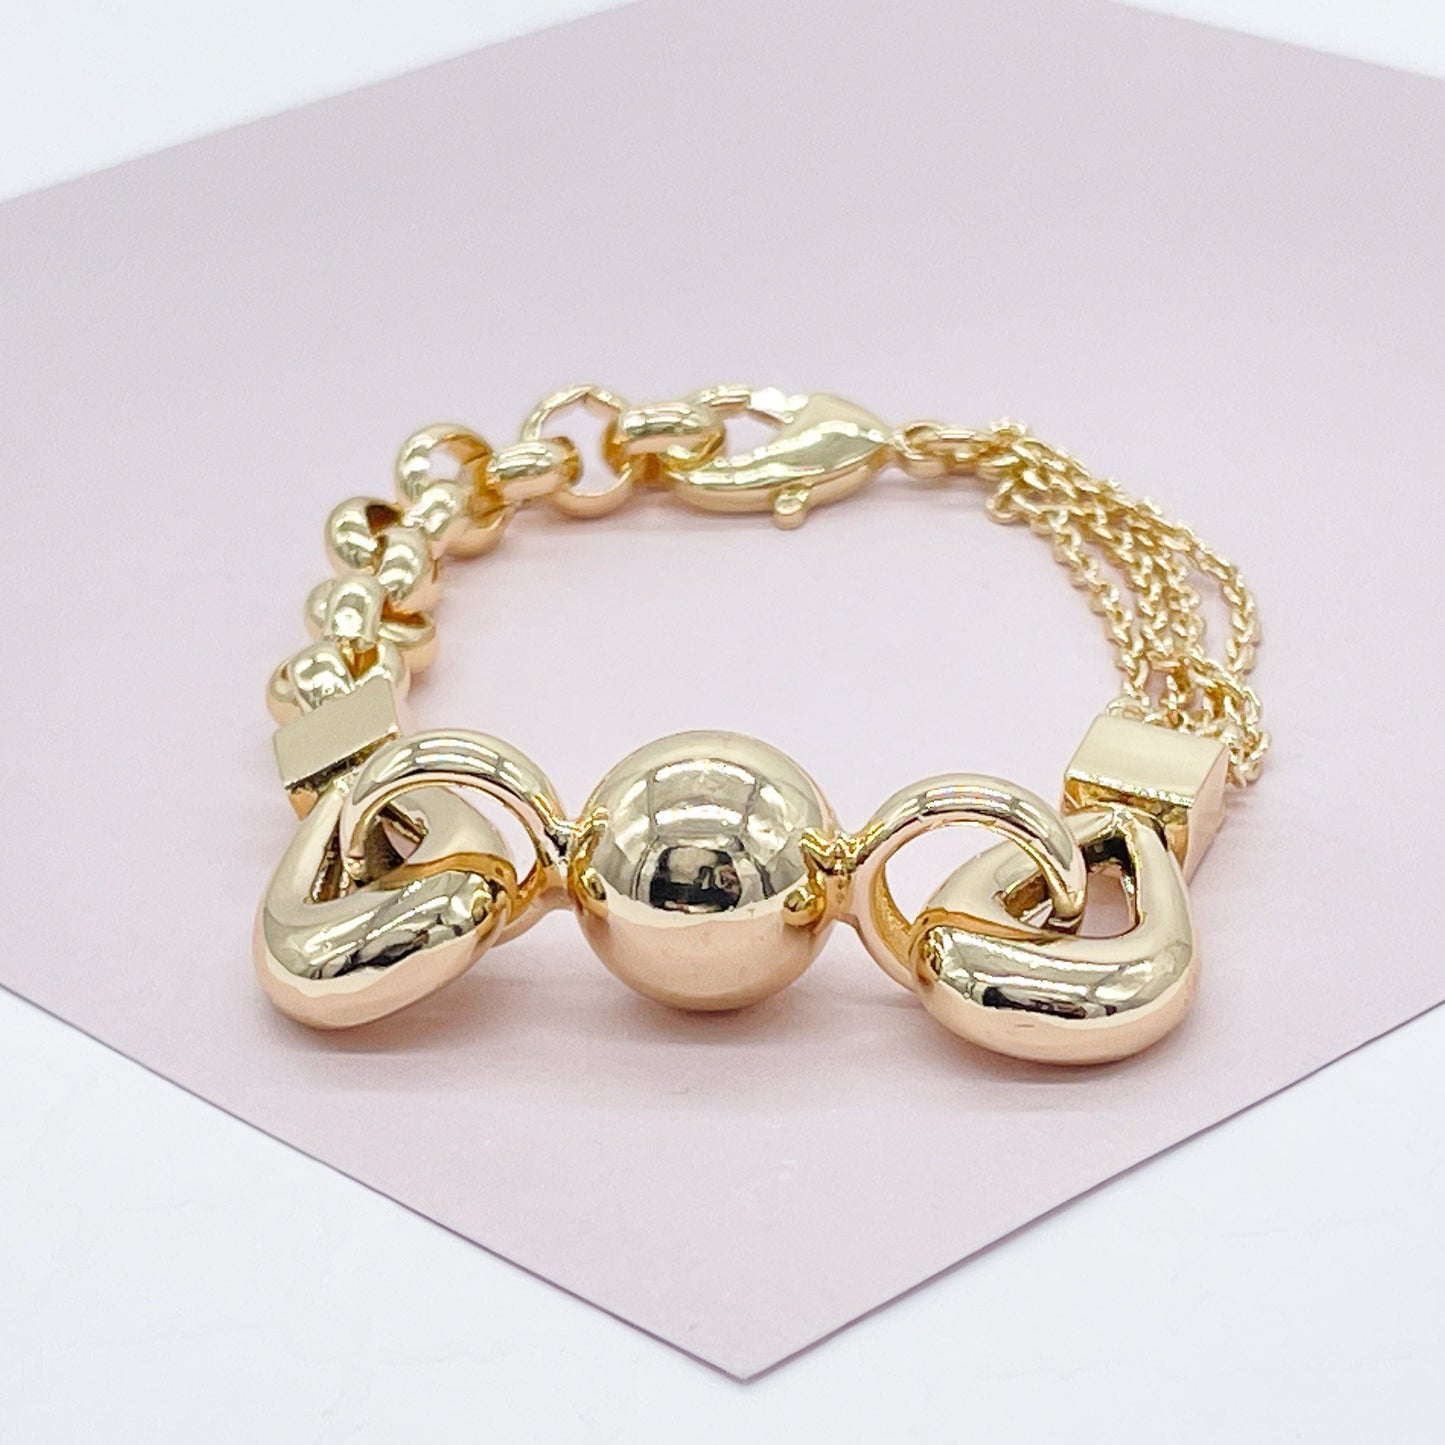 18k Gold Layered Ball Bracelet Featuring Sphere Loosed Connected By Mix Of Rolo